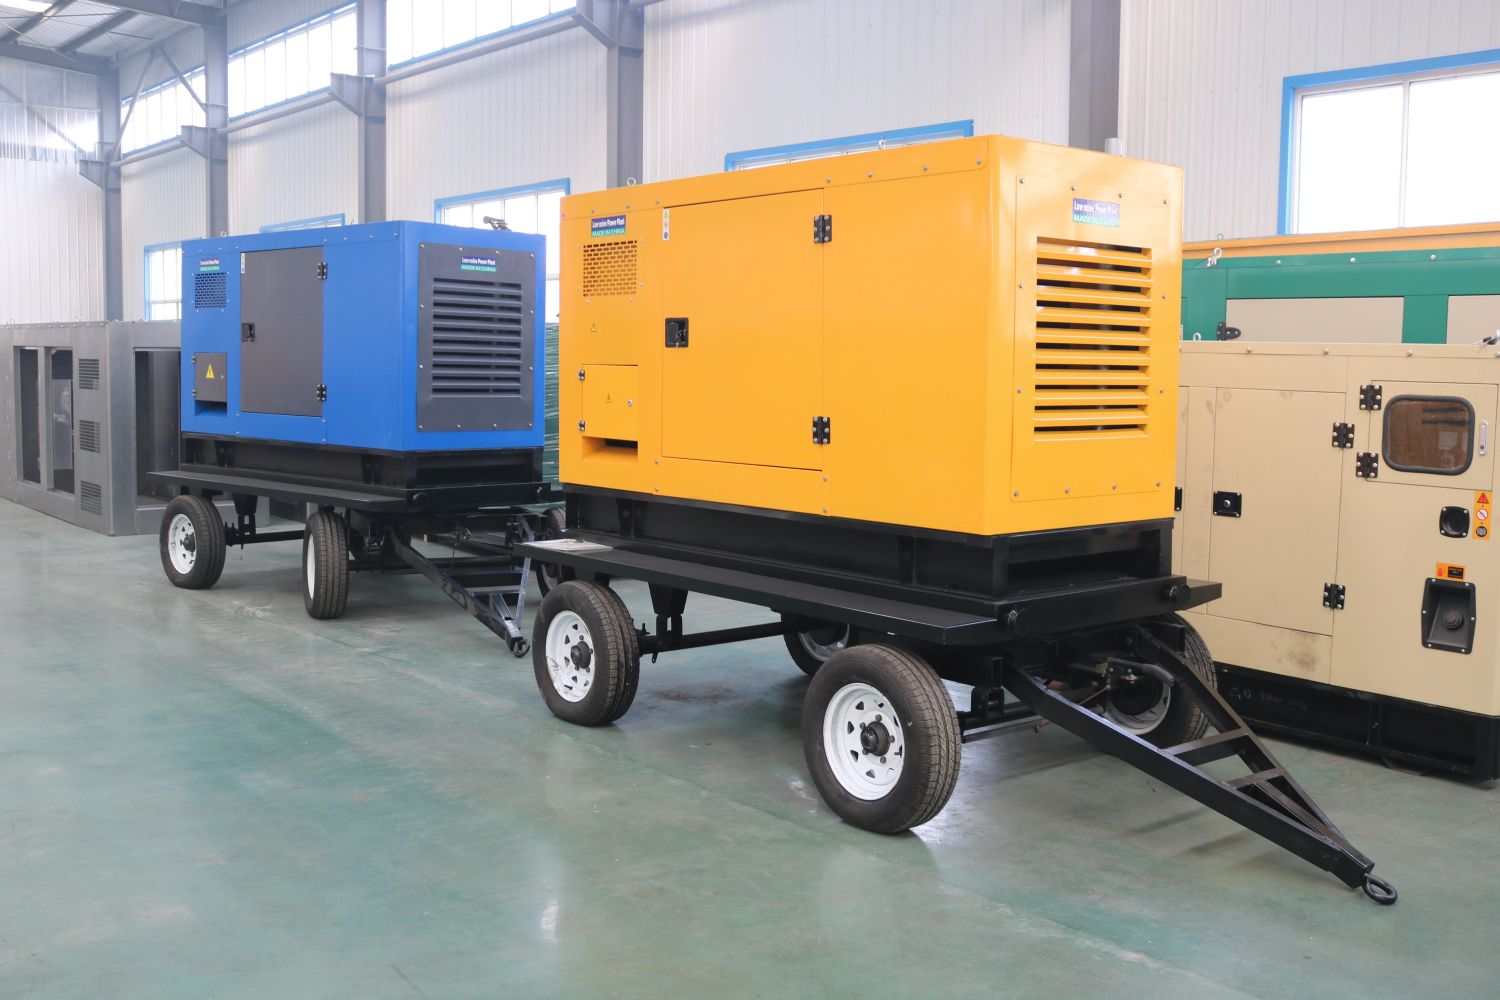 India Diesel Genset Market Trends, Size, Share, Installed Base, Delhi Ban Issue, Growth Status, and Forecast 2023-2030 | Latest Market Study by RationalStat Answers Dual Fuel Strategy